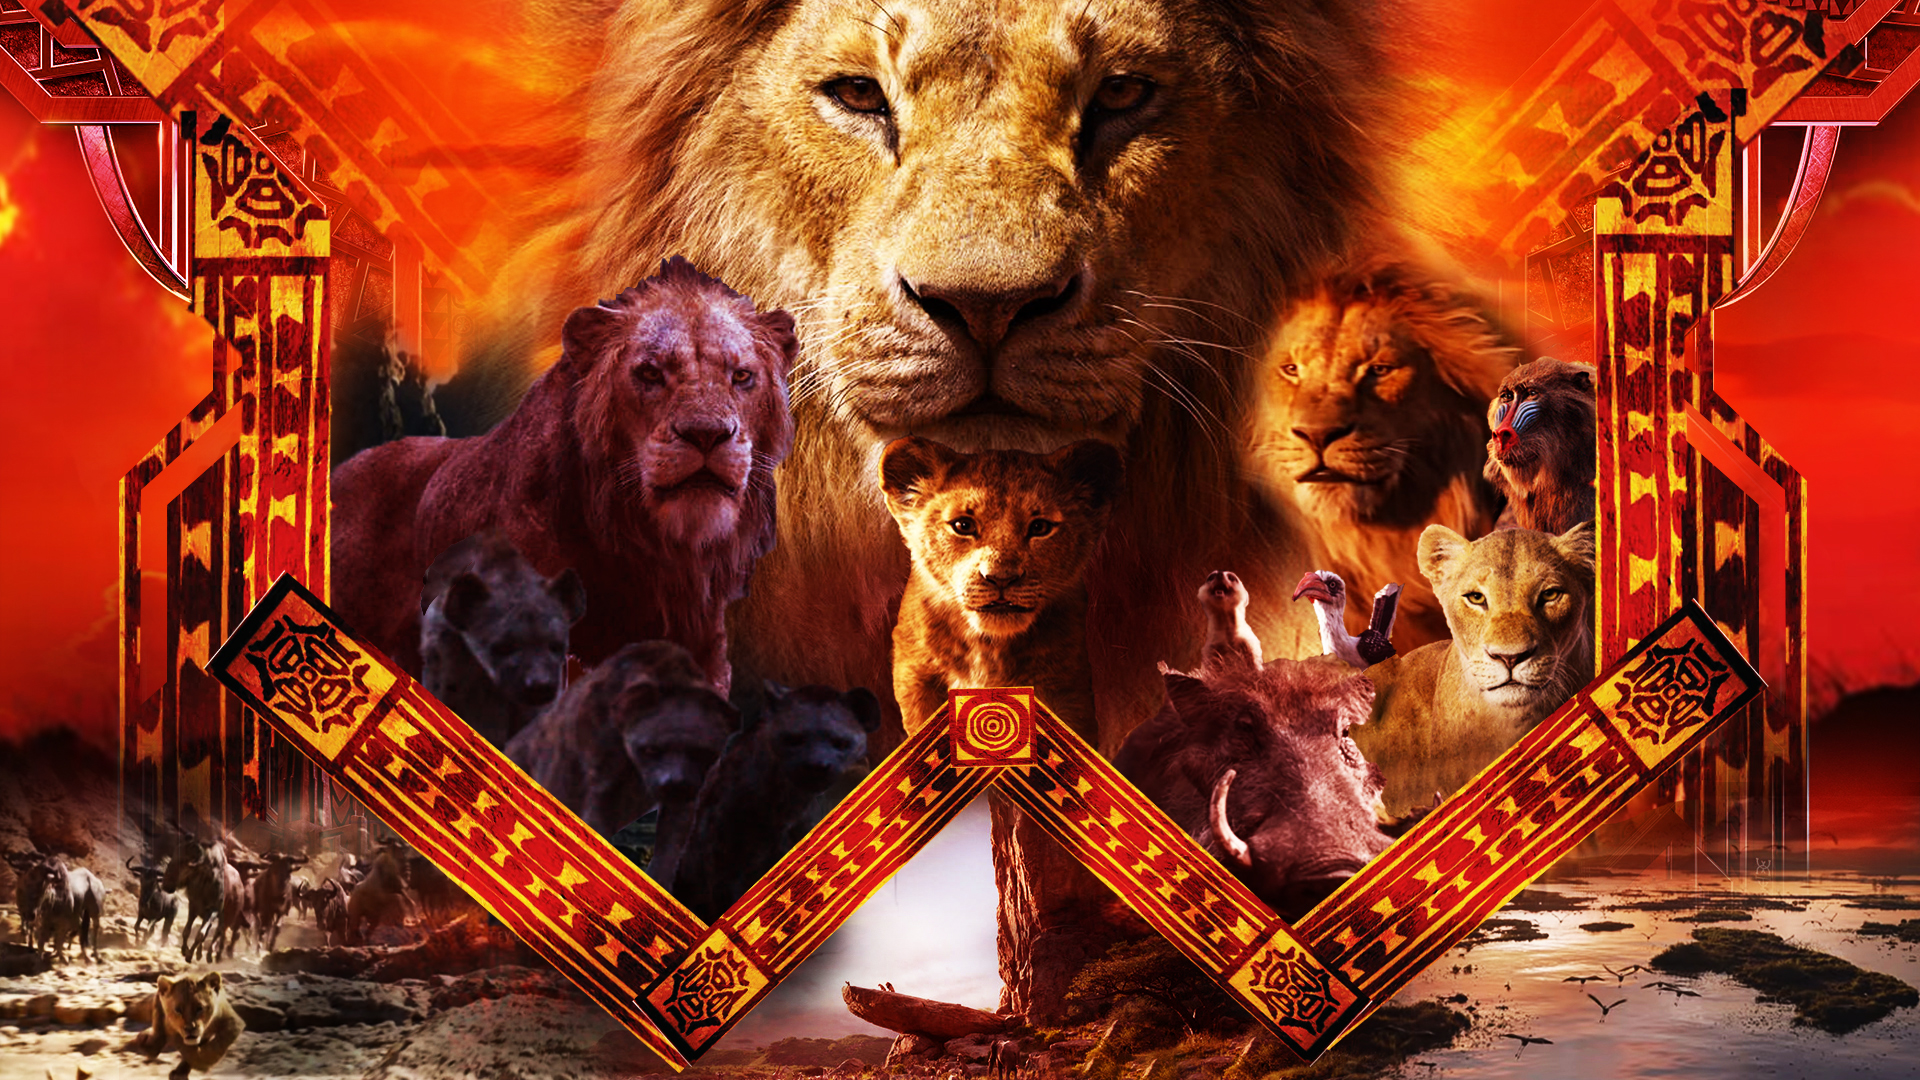 The Lion King 19 Wallpaper By Thekingblader995 On Deviantart